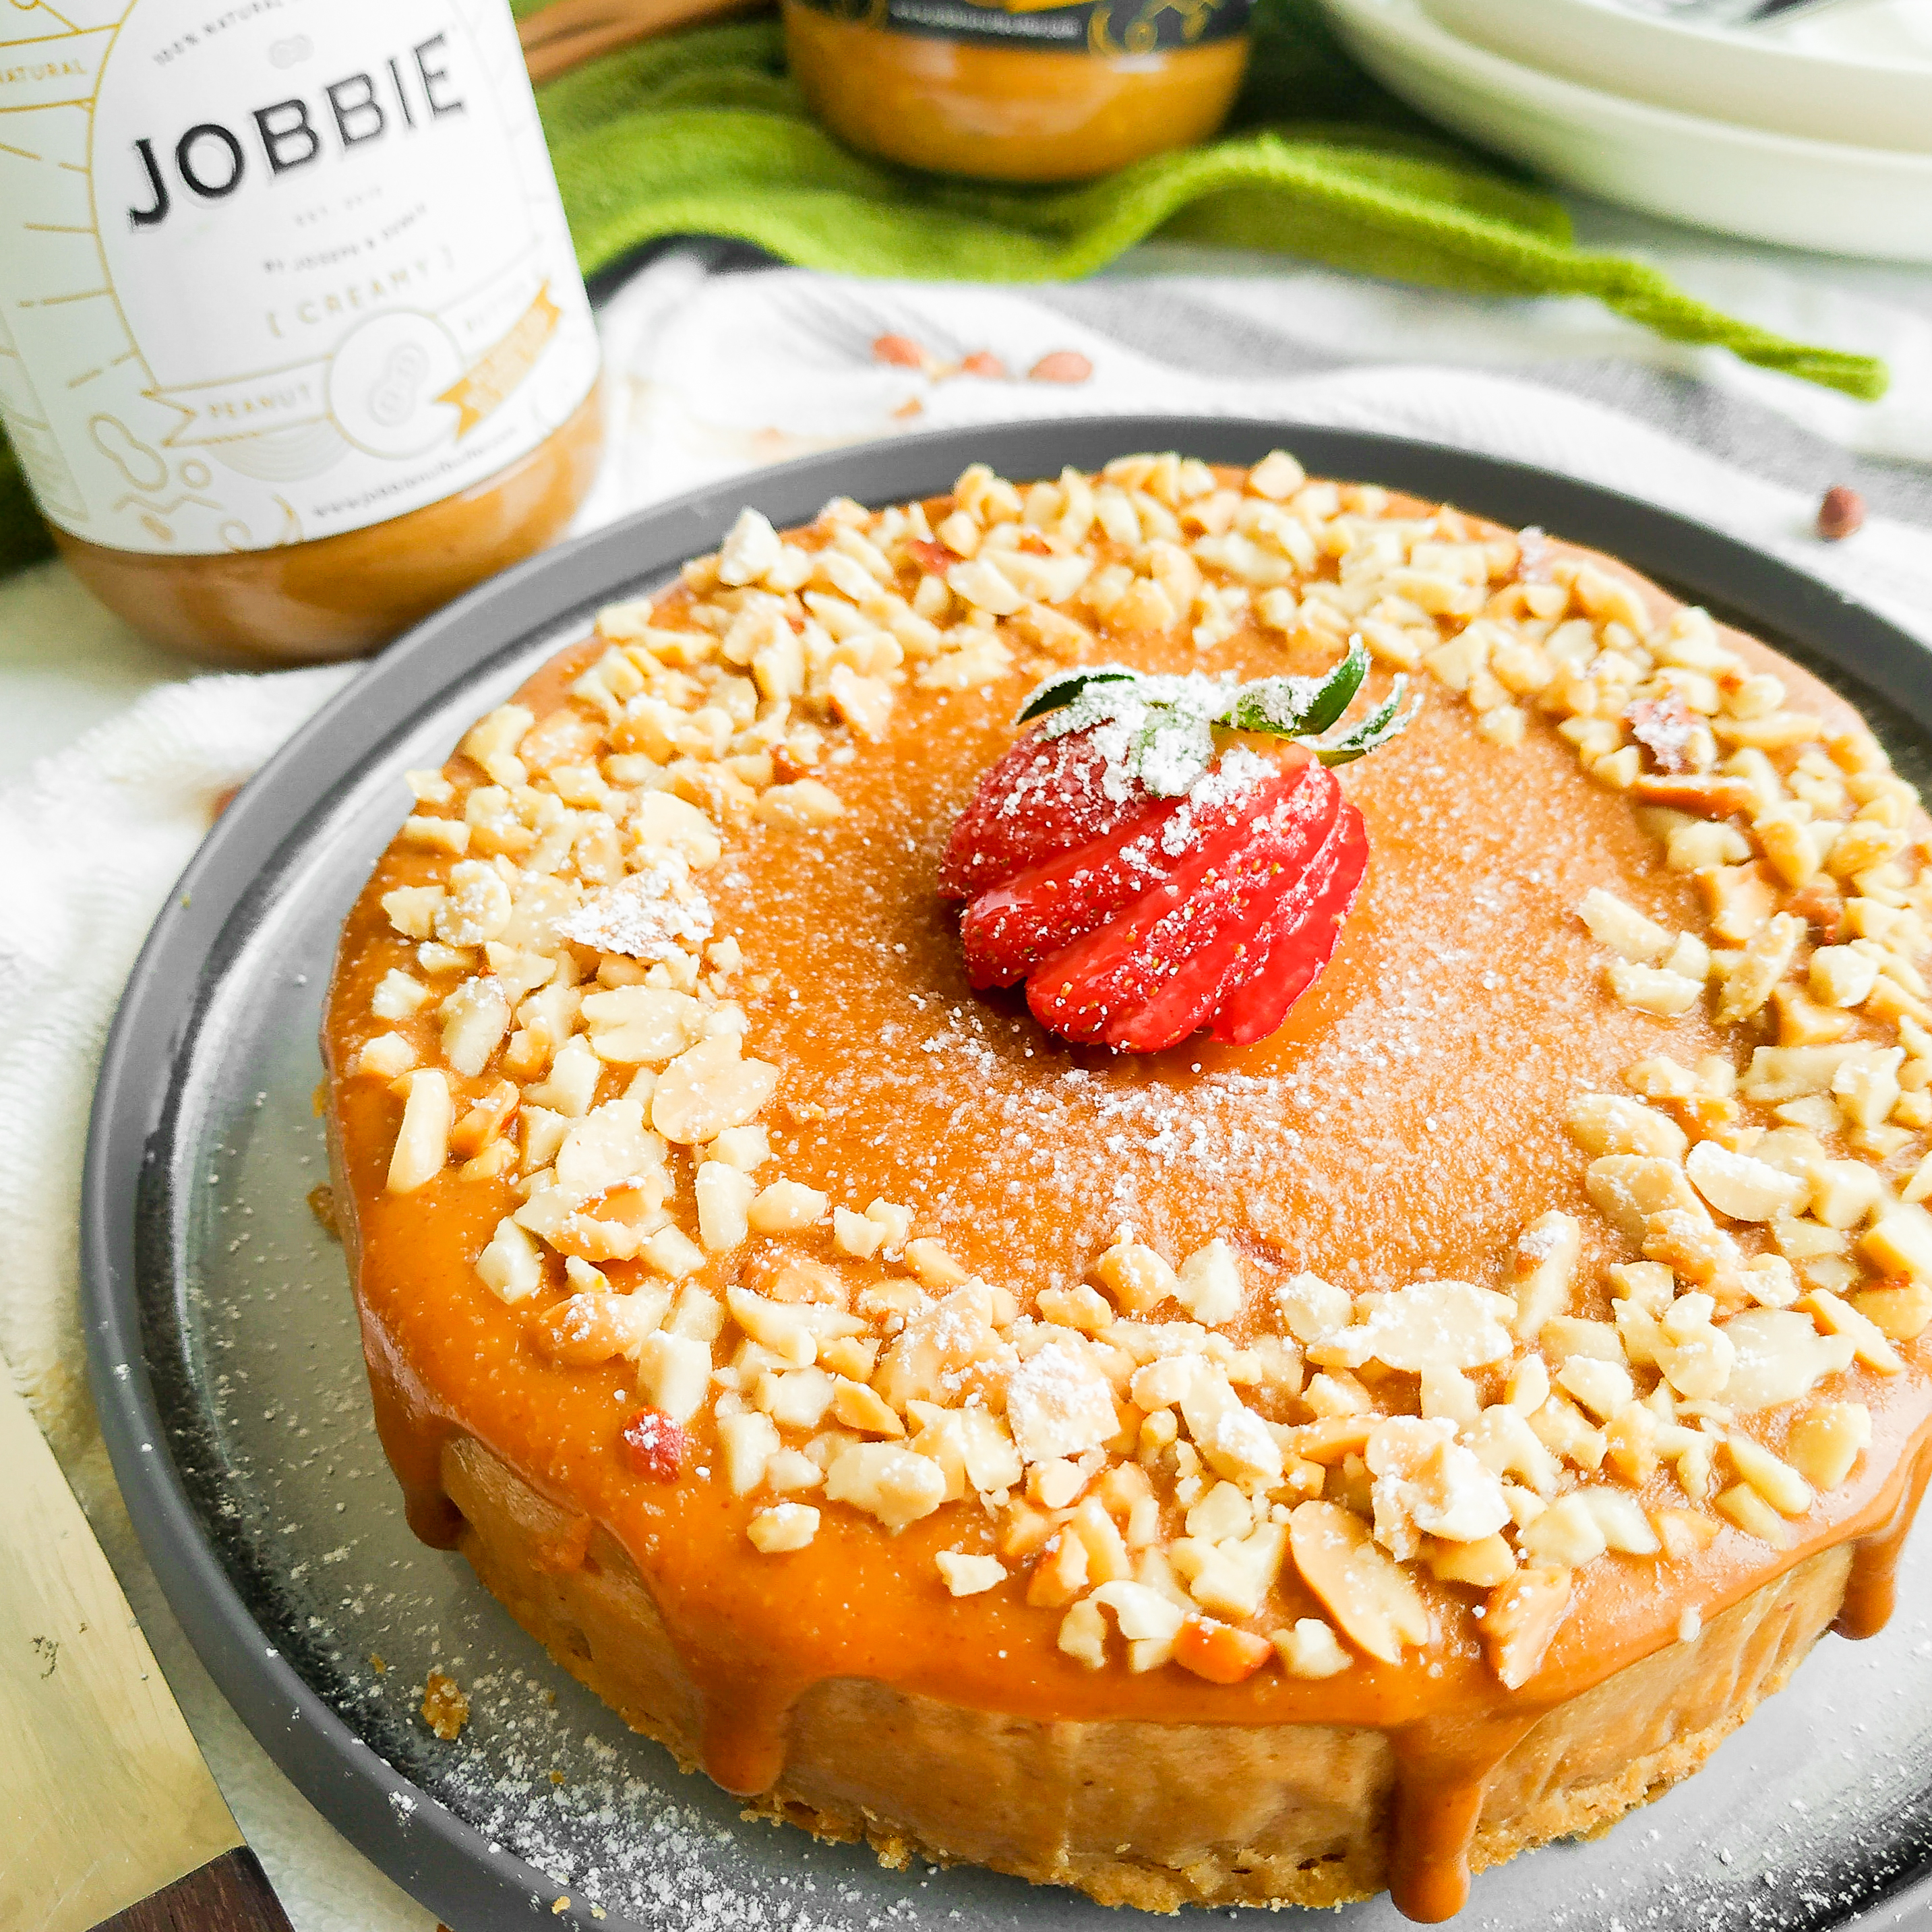 JOBBIE Peanut Butter Cheesecake by @dough_and_stove